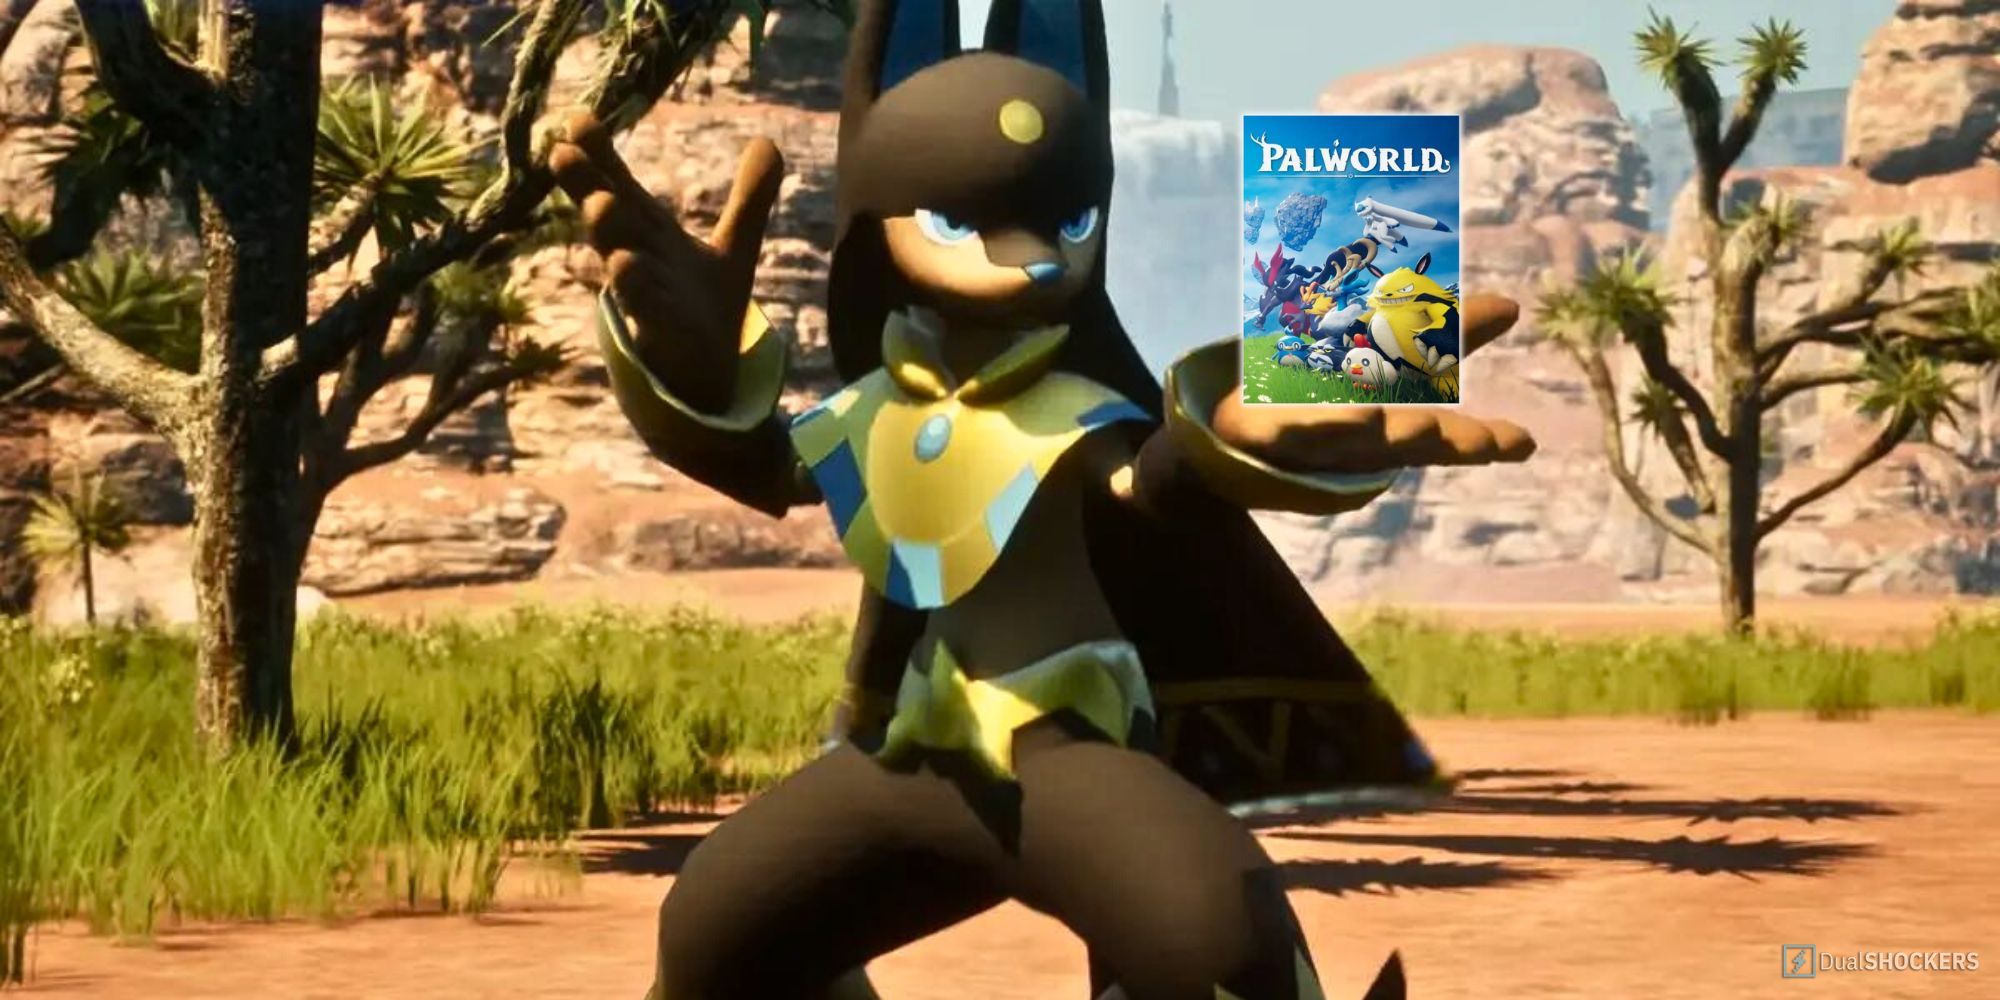 Featured image with Palworld character Anubis holding the game's cover in its hand.